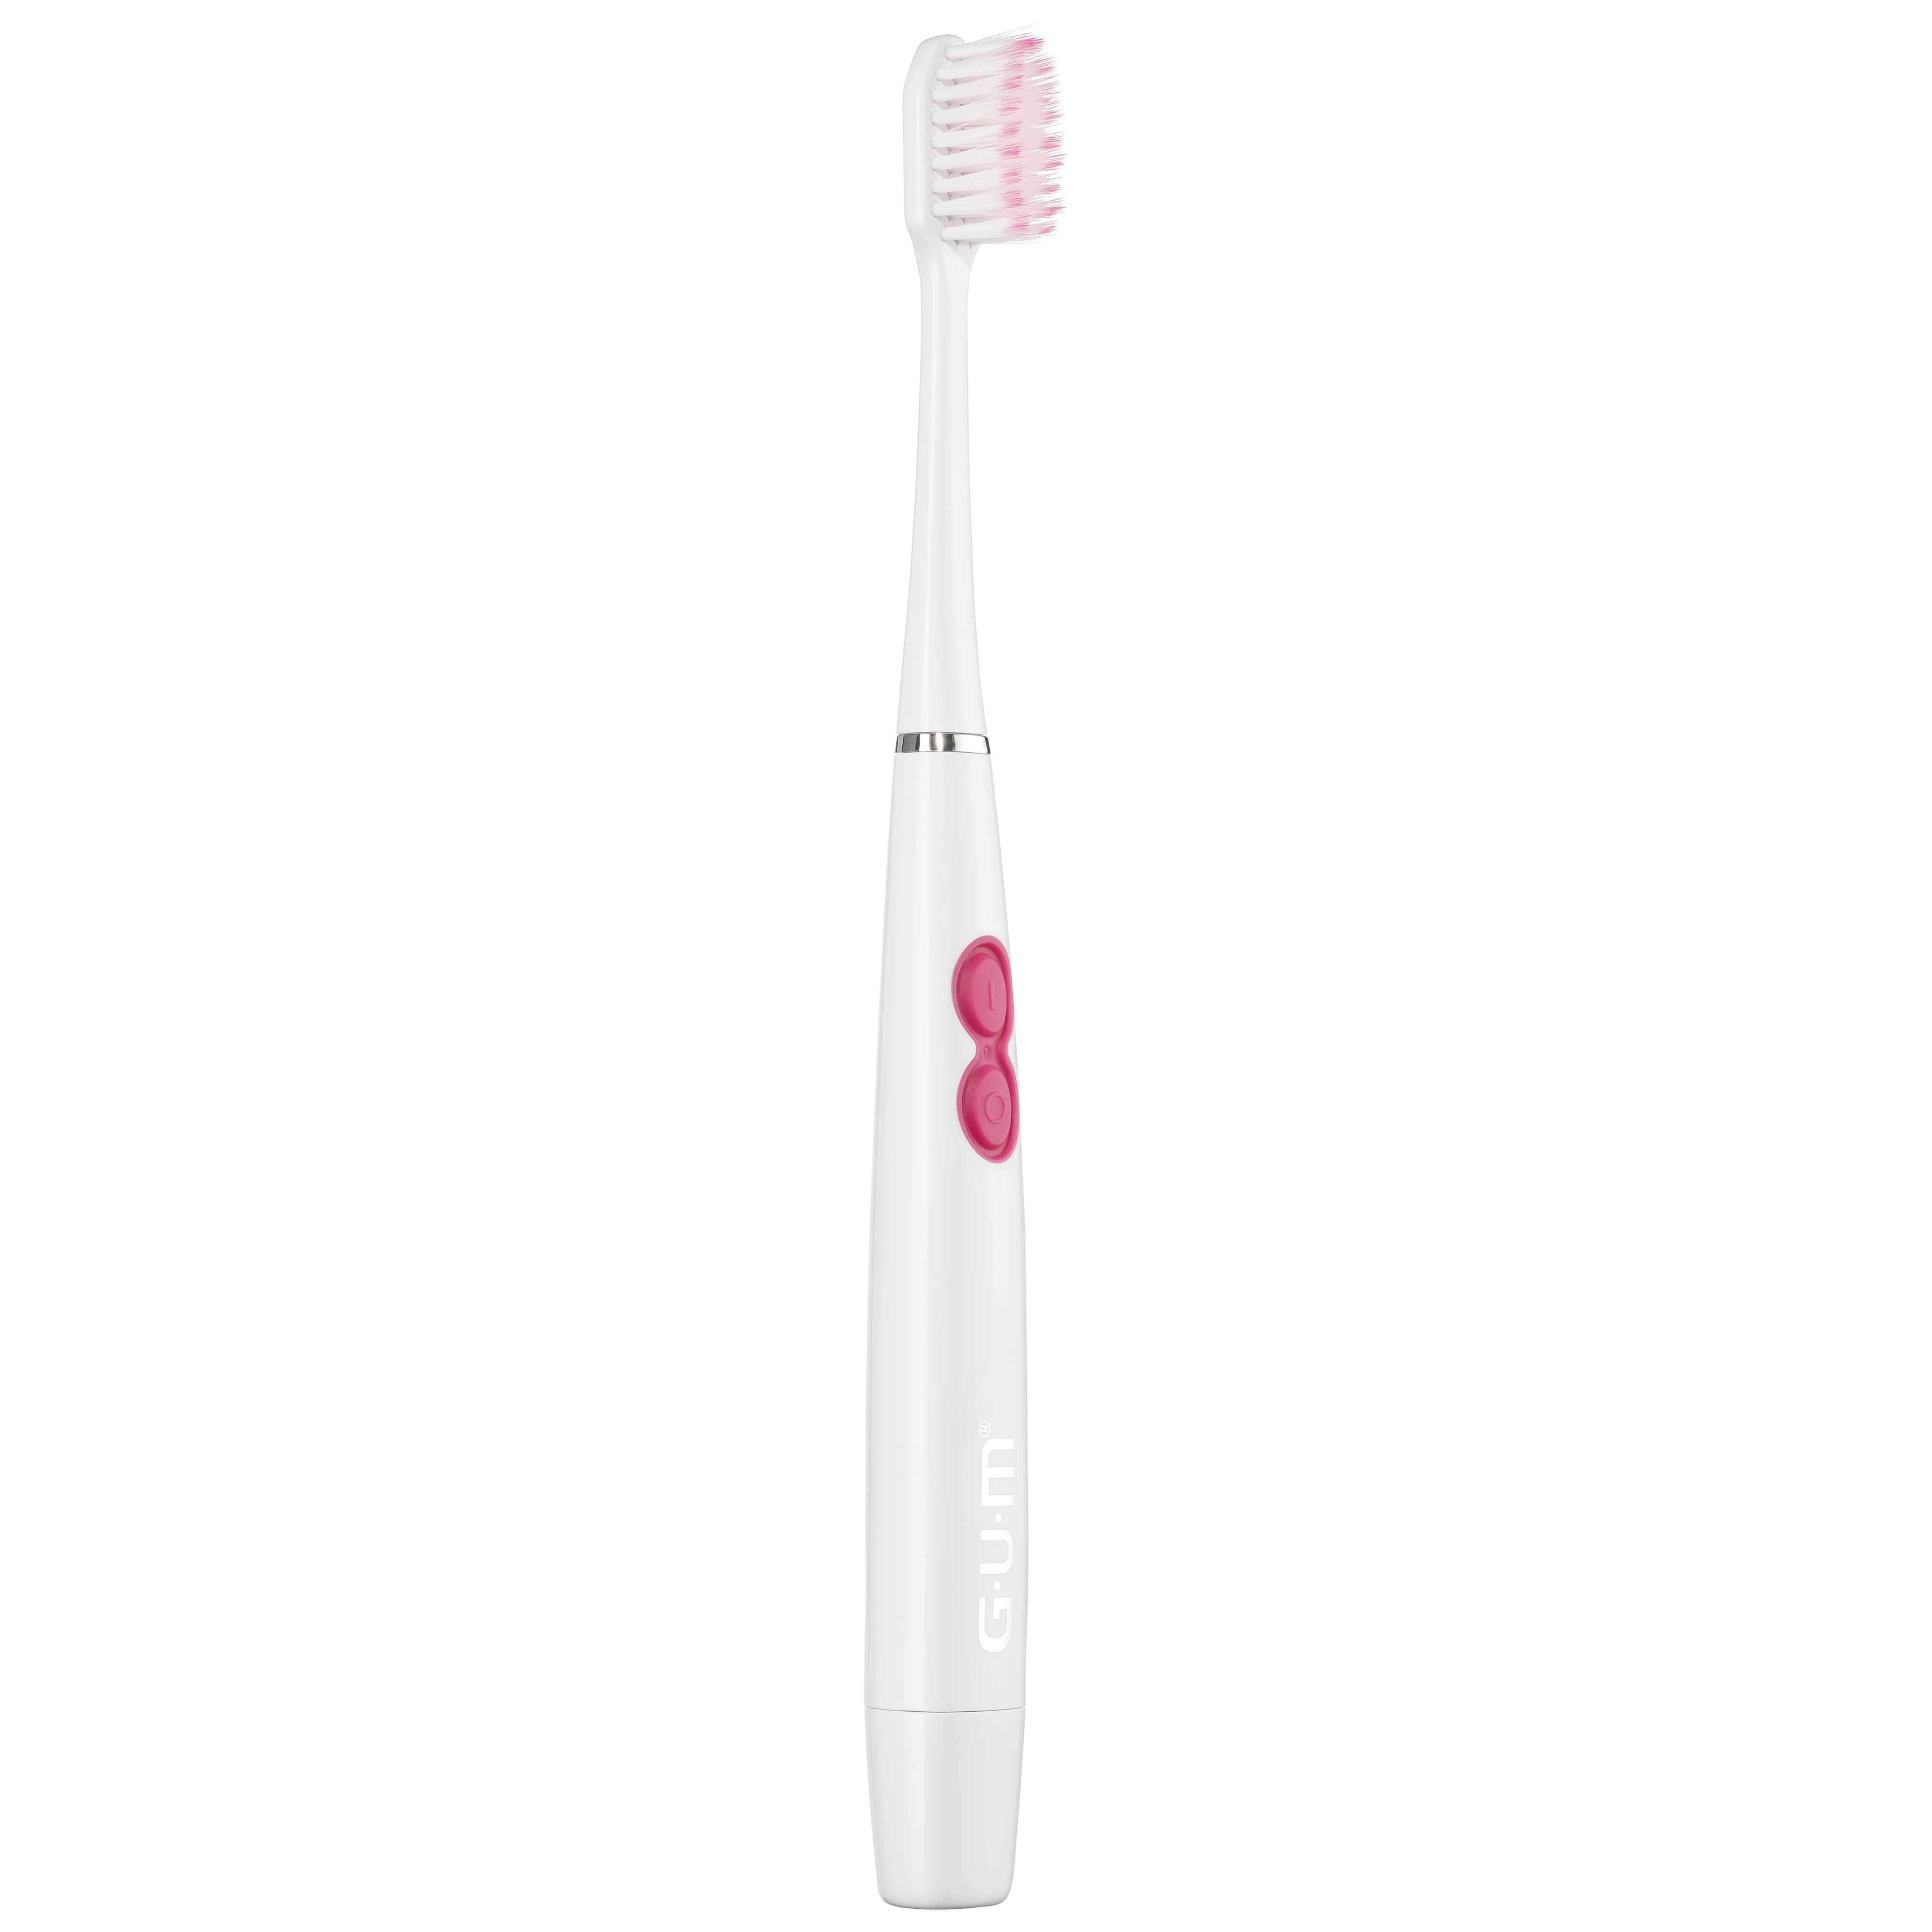 GUM SONIC SENSITIVE Battery Powered Electric Toothbrush | Highly Portable | Provides Ultra Gentle And Deep Clean